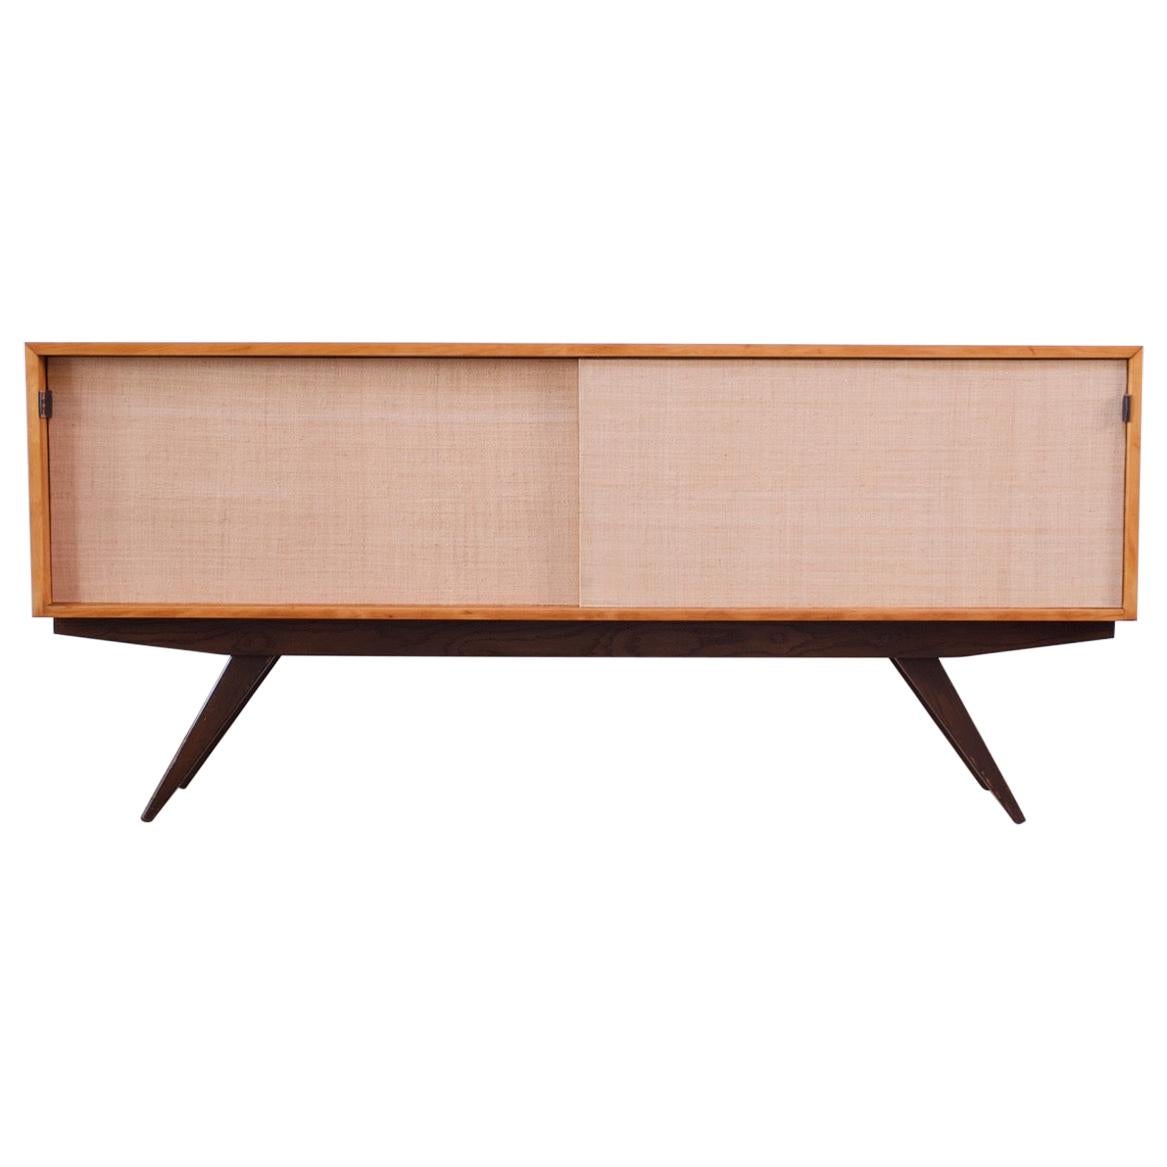 Early Florence Knoll Credenza / Cabinet in Mahogany, Birch, and Grasscloth